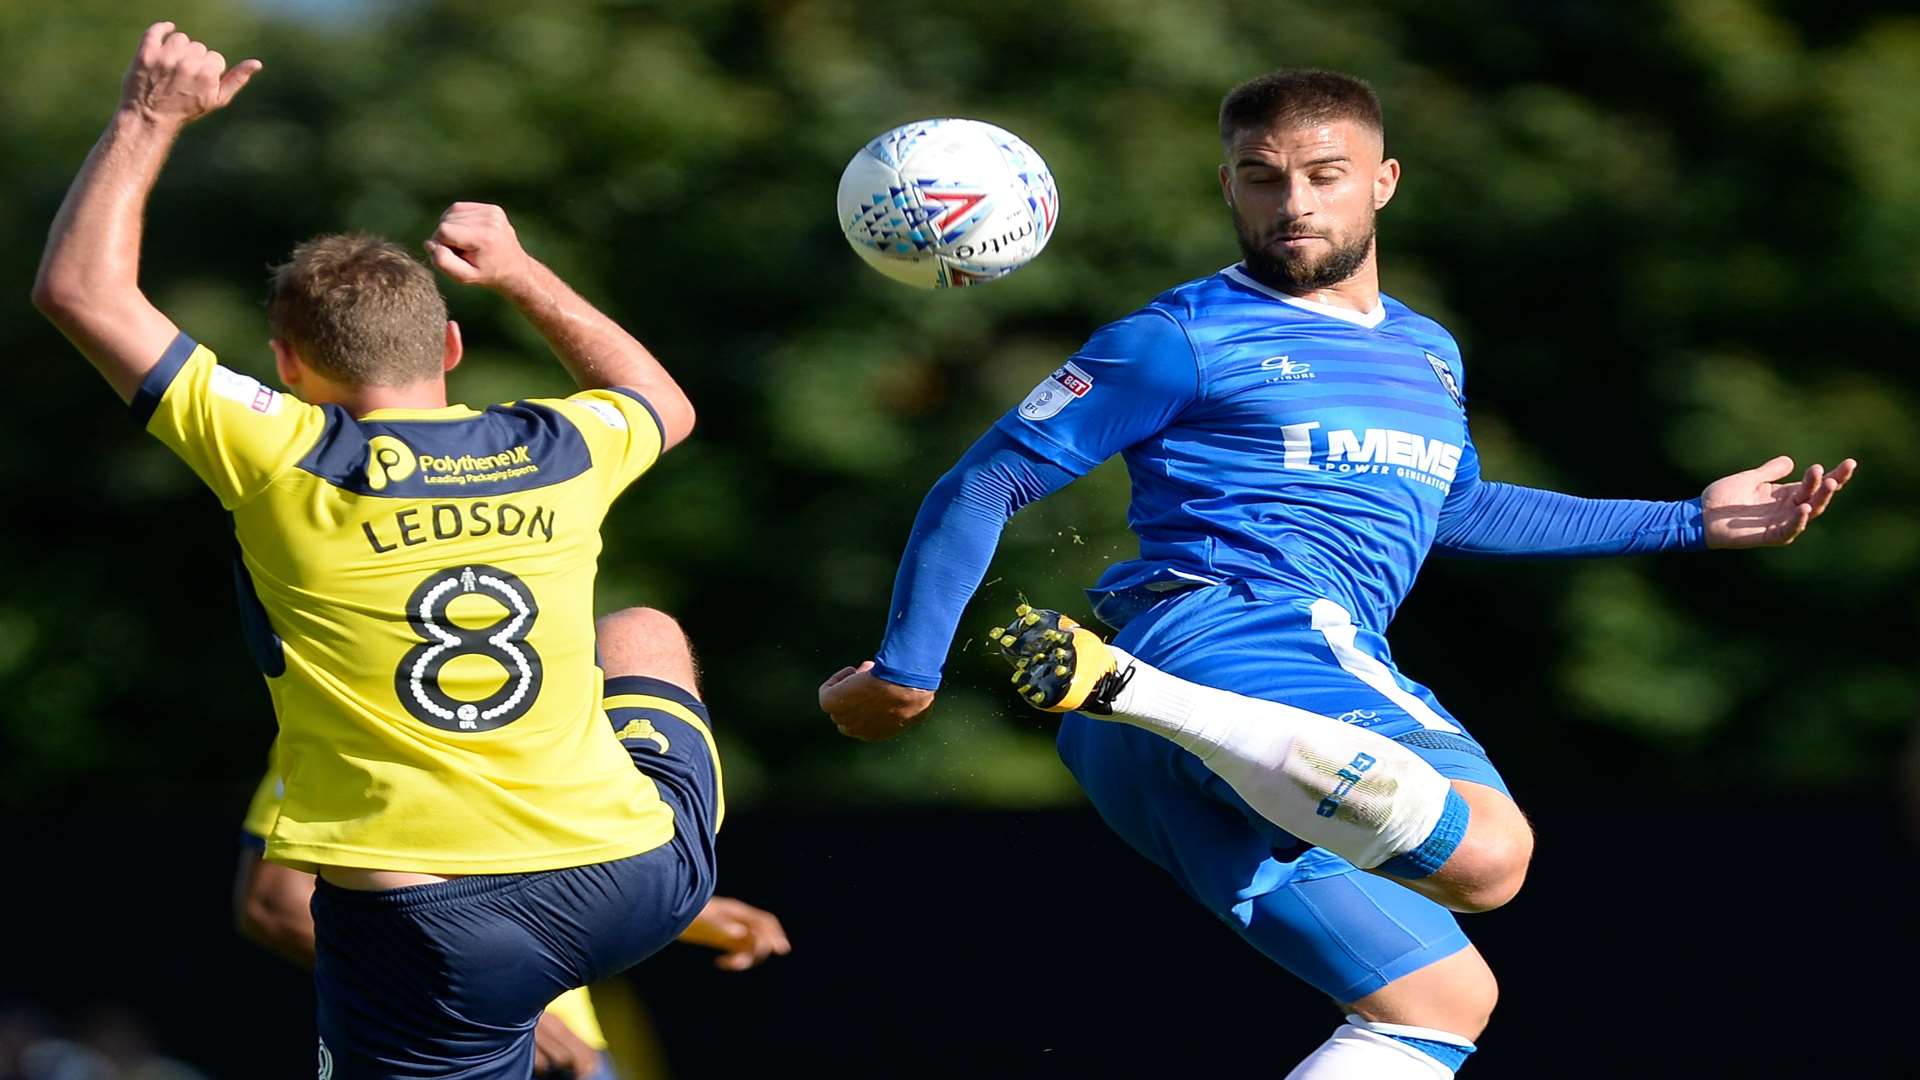 Gillingham’s Max Ehmer shows a deft touch in front of Oxford’s Ryan Ledson. Picture: Ady Kerry